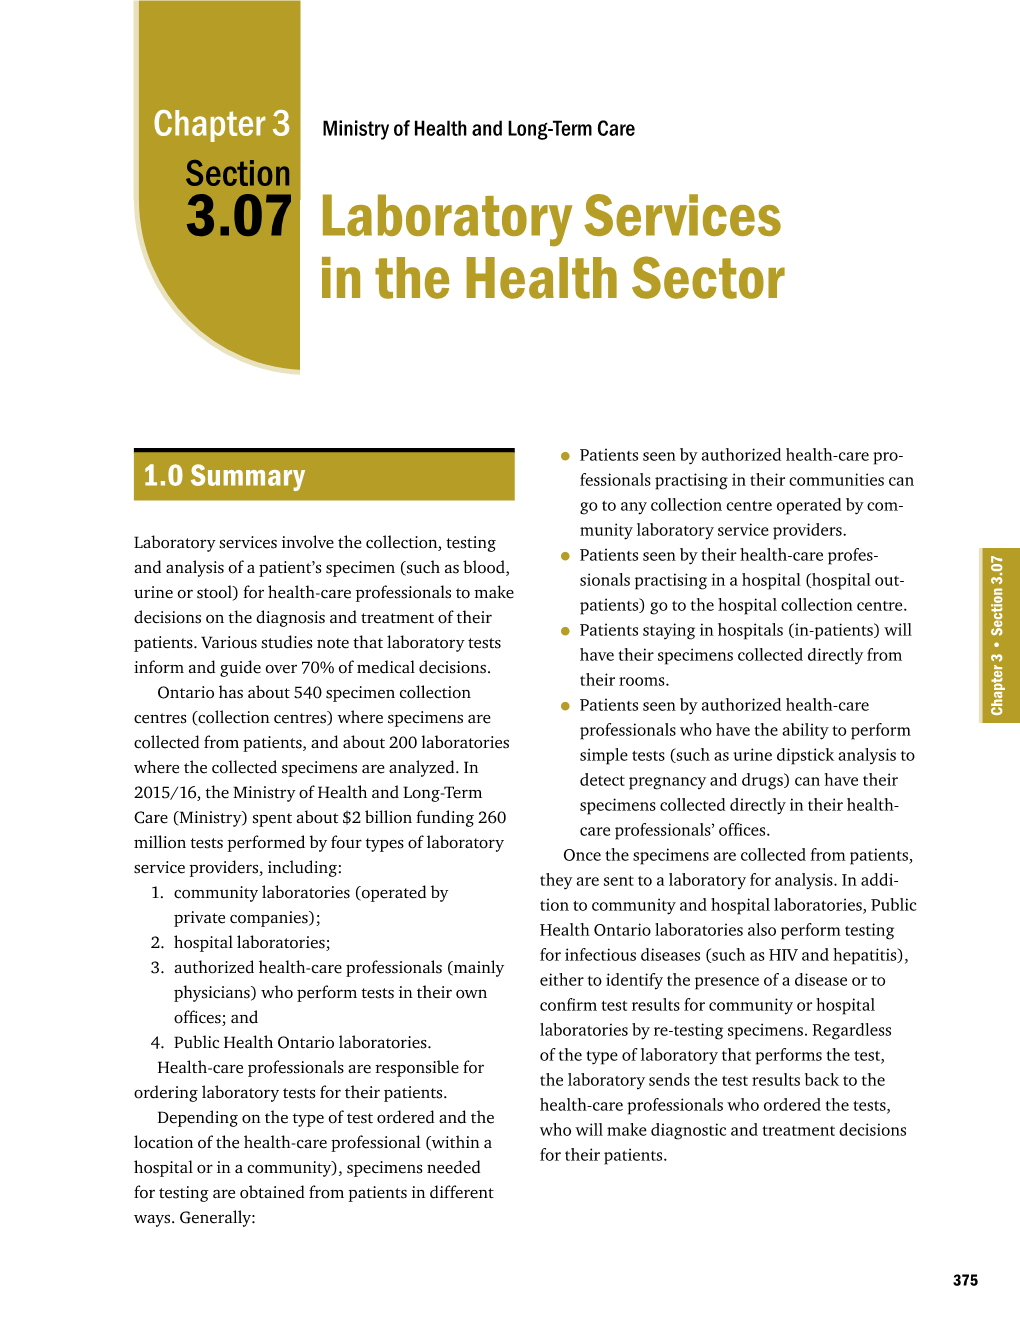 3.07 Laboratory Services in the Health Sector